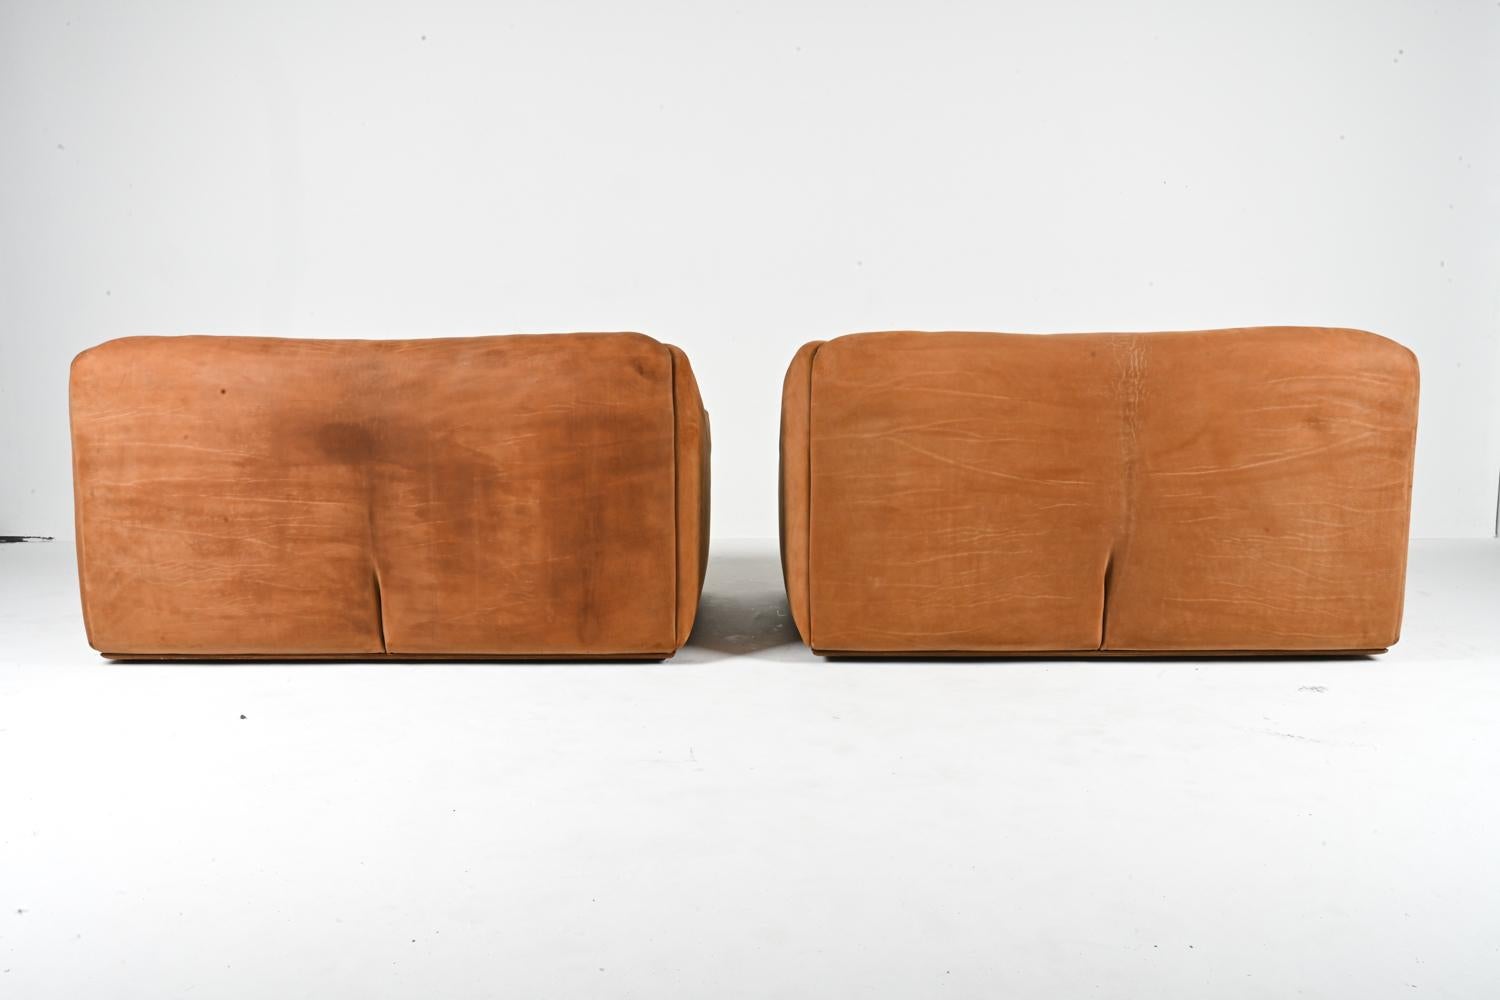 Pair of De Sede DS-47 Two-Seat Sofas in Nubuck Leather, c. 1970's For Sale 10